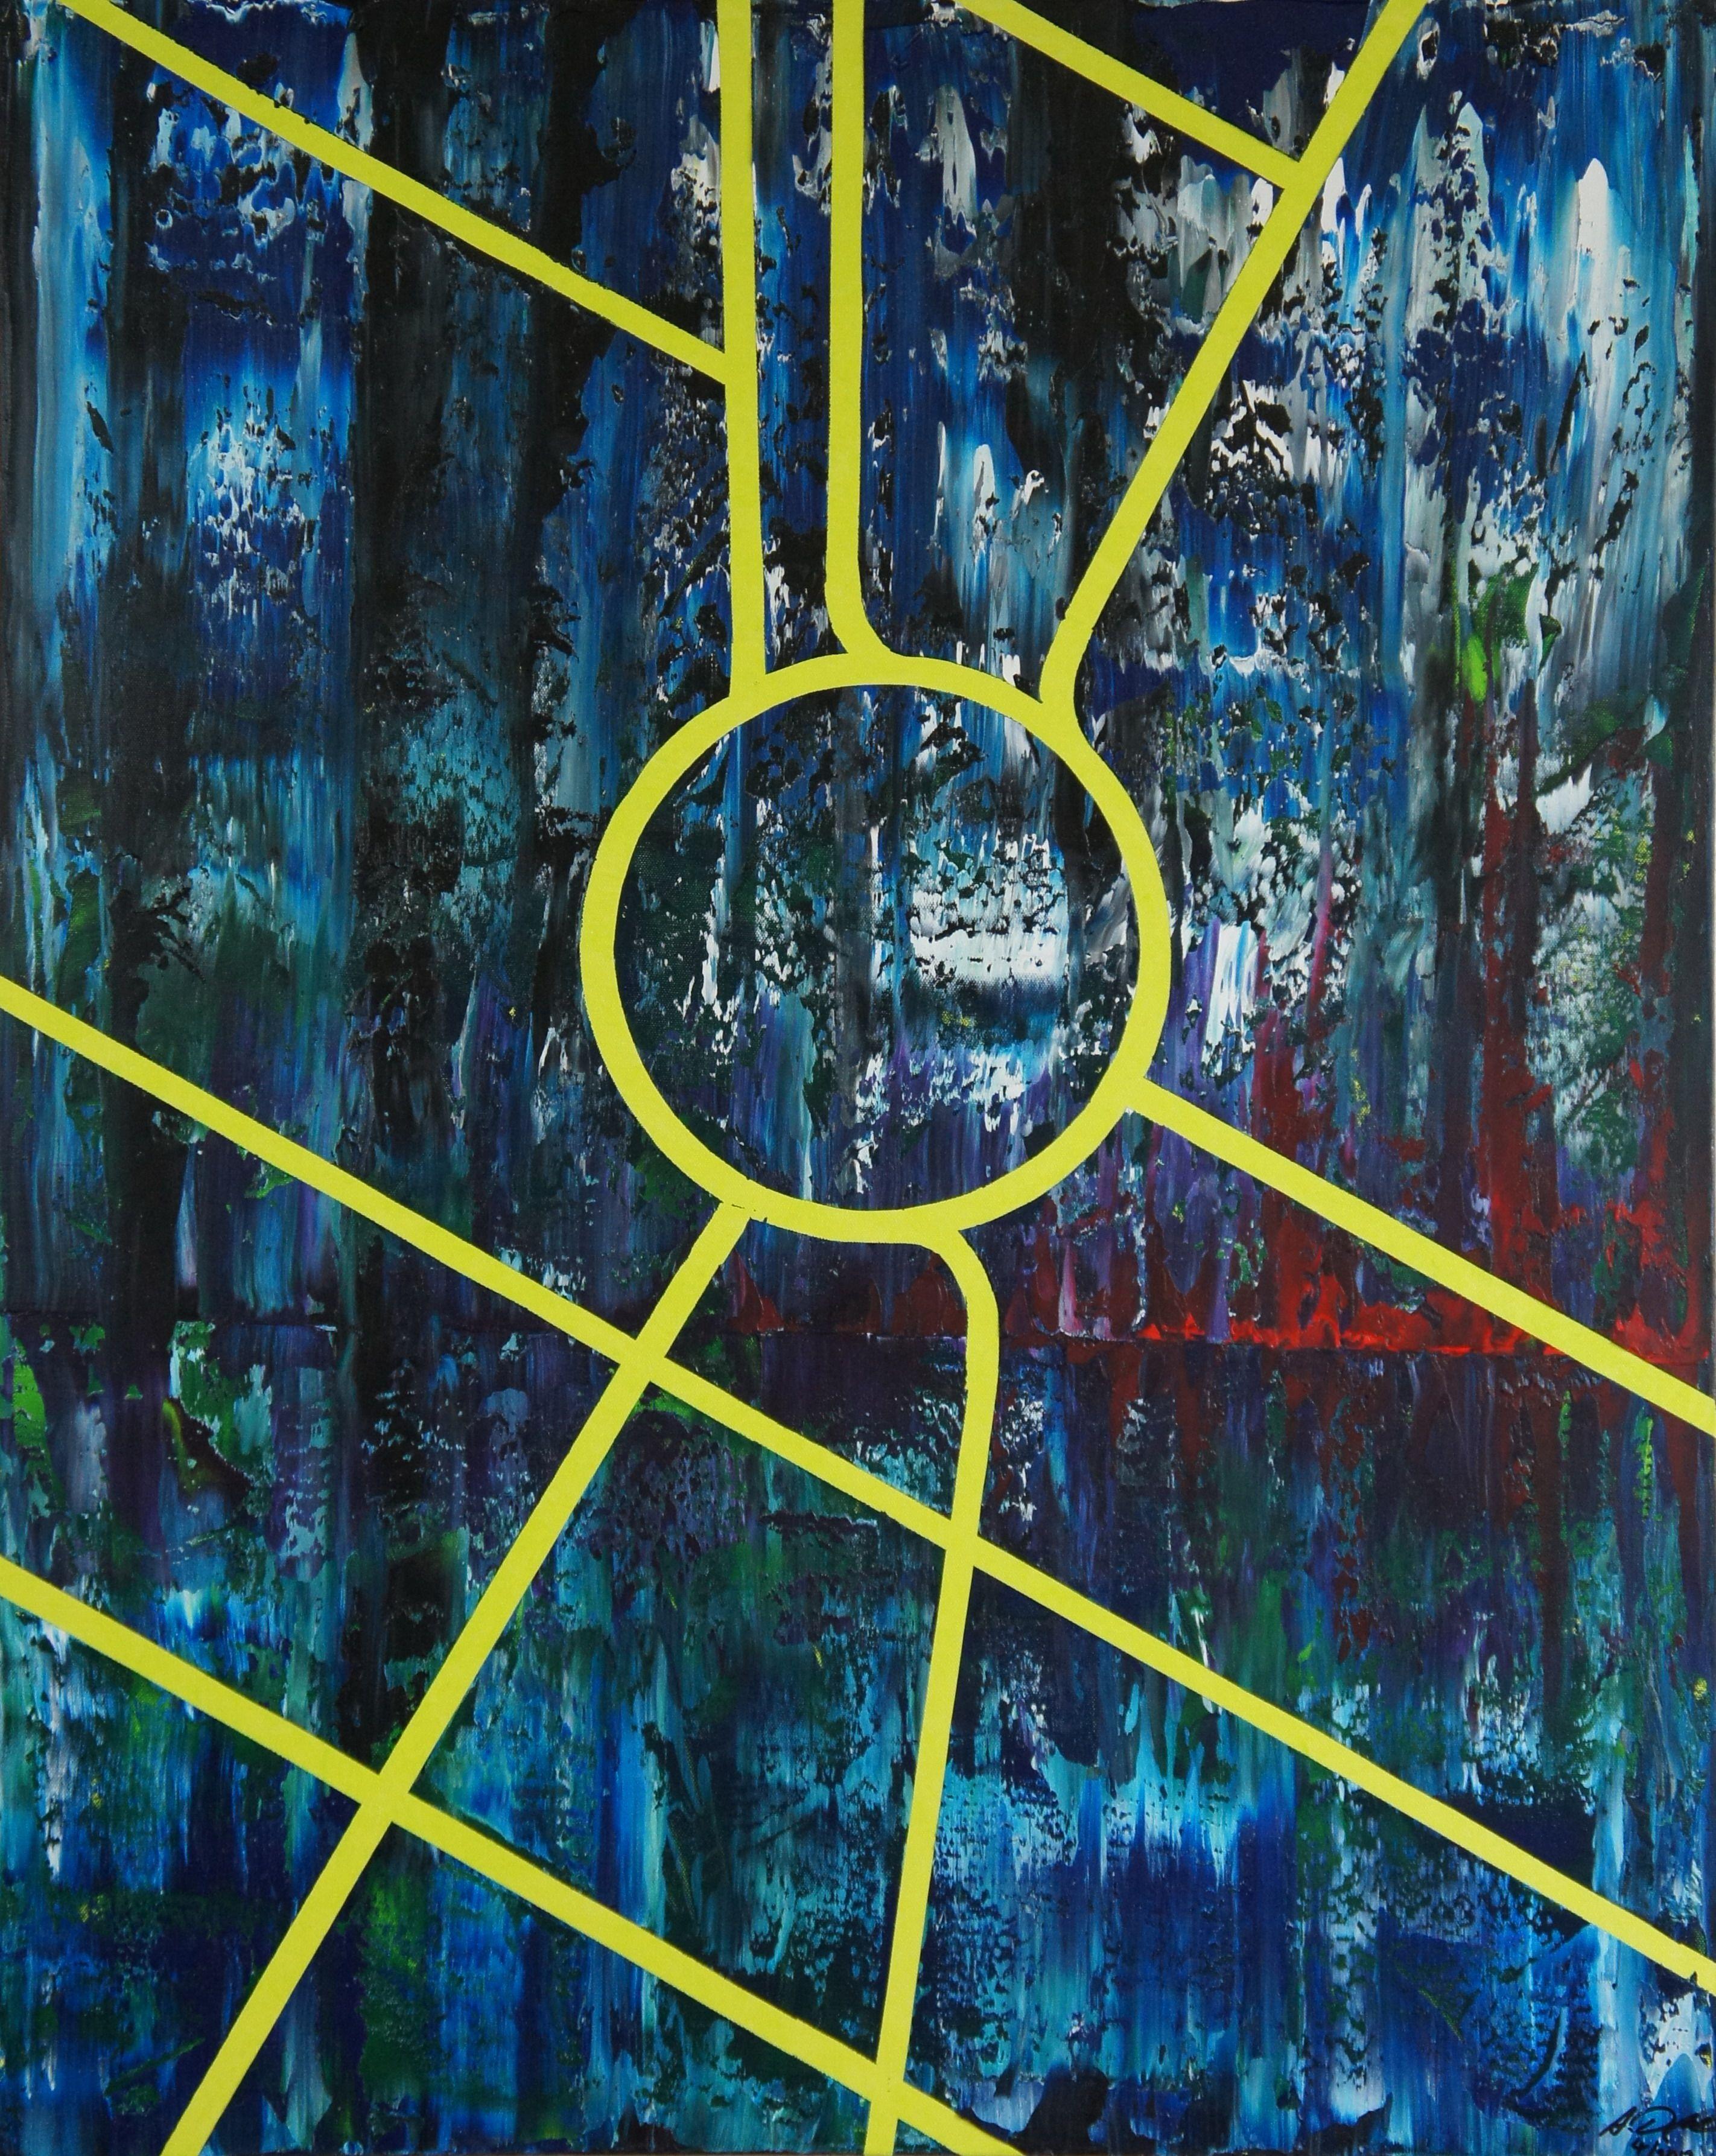 Ansgar Dressler Abstract Painting - Columbus Circle, New York City, Painting, Oil on Canvas